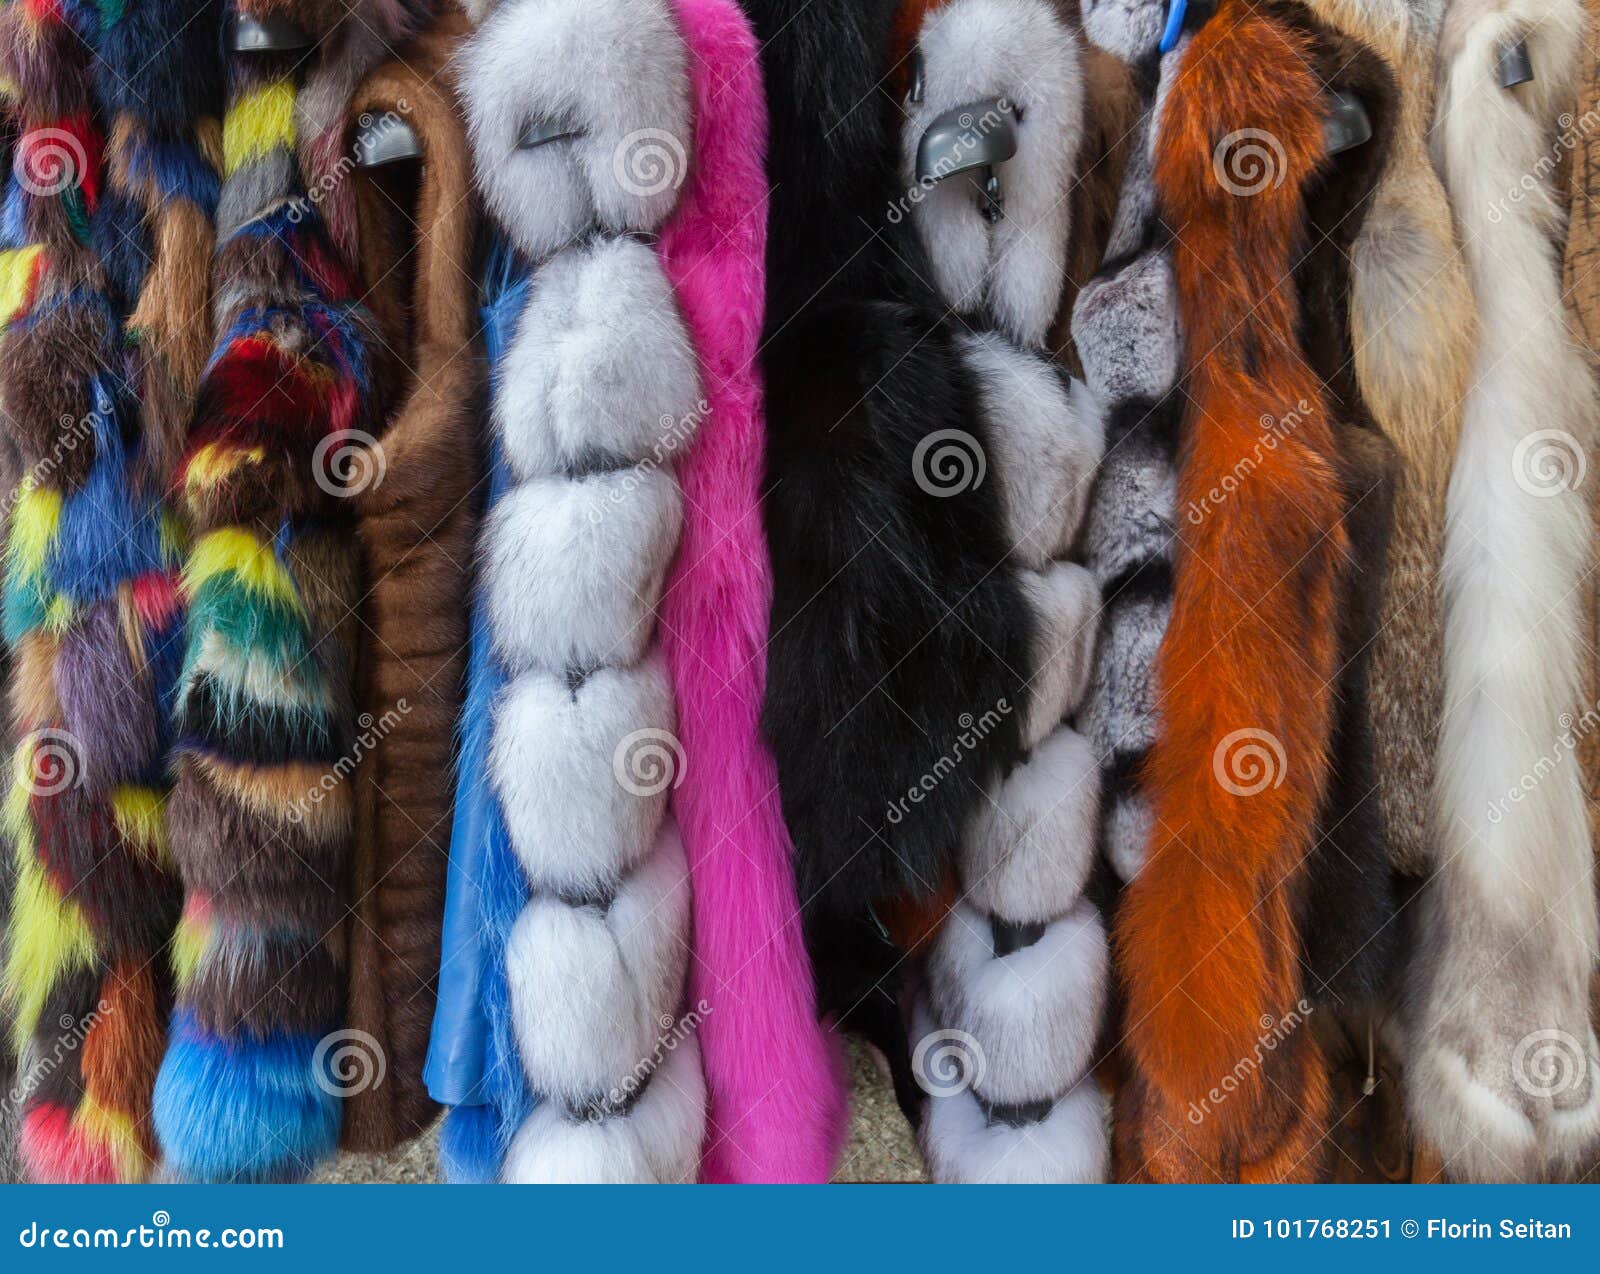 Multicolored Faux Fur Coats Stock Image - Image of color, hair: 101768251